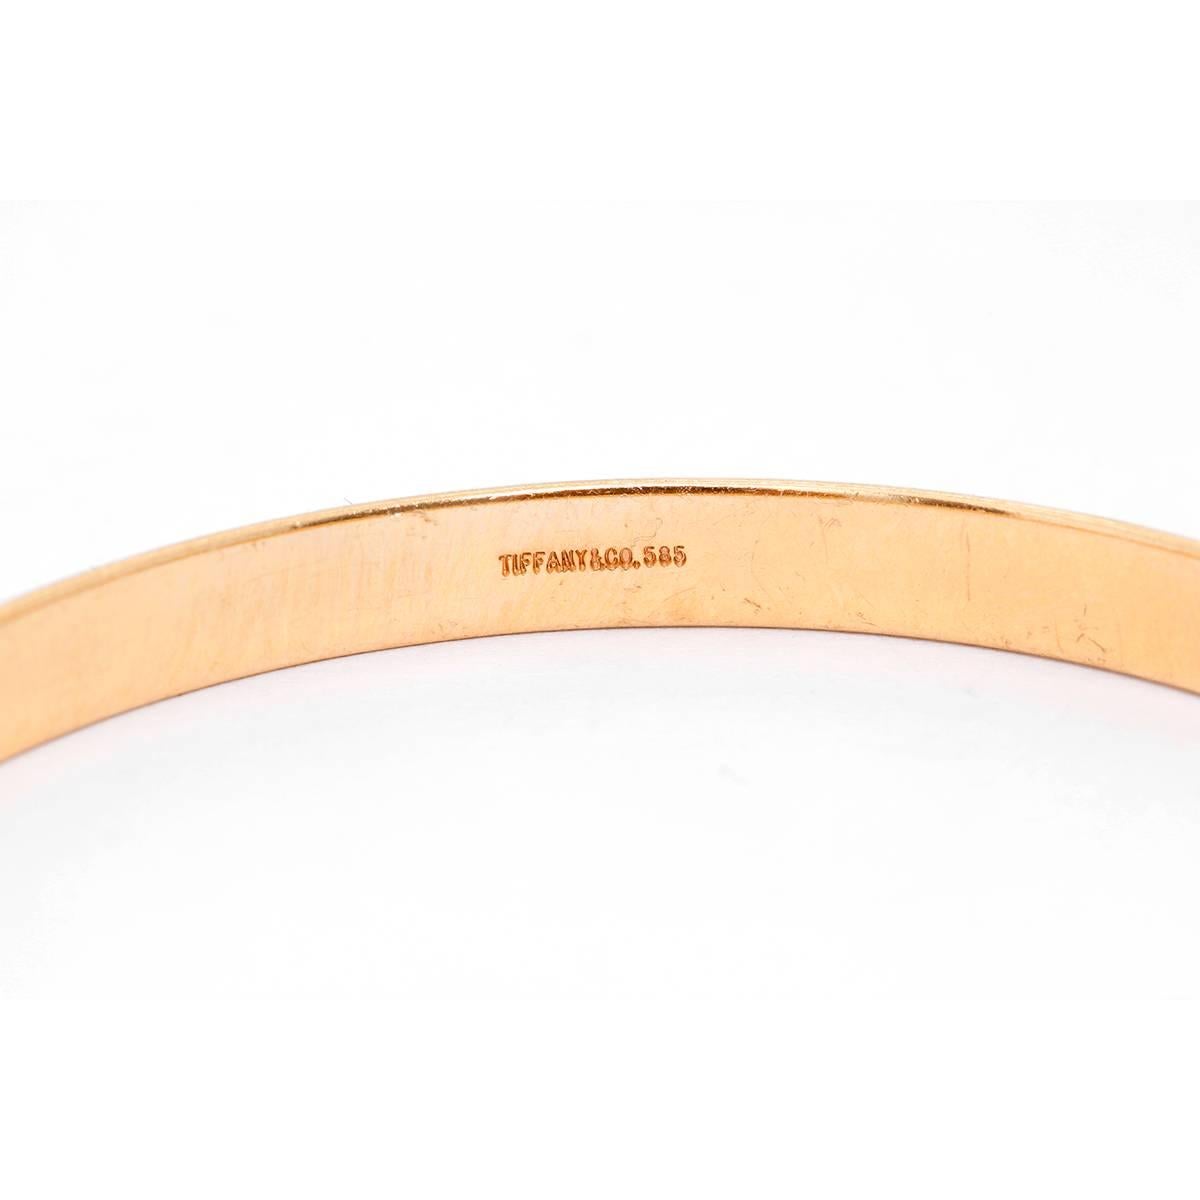 Tiffany & Co. 14K Yellow Gold Oval Bangle Size 6 3/4 - . Pre-owned with custom box.  Size 6 3/4. Hallmarks Tiffany & Co., 585. Total weight 8 grams.